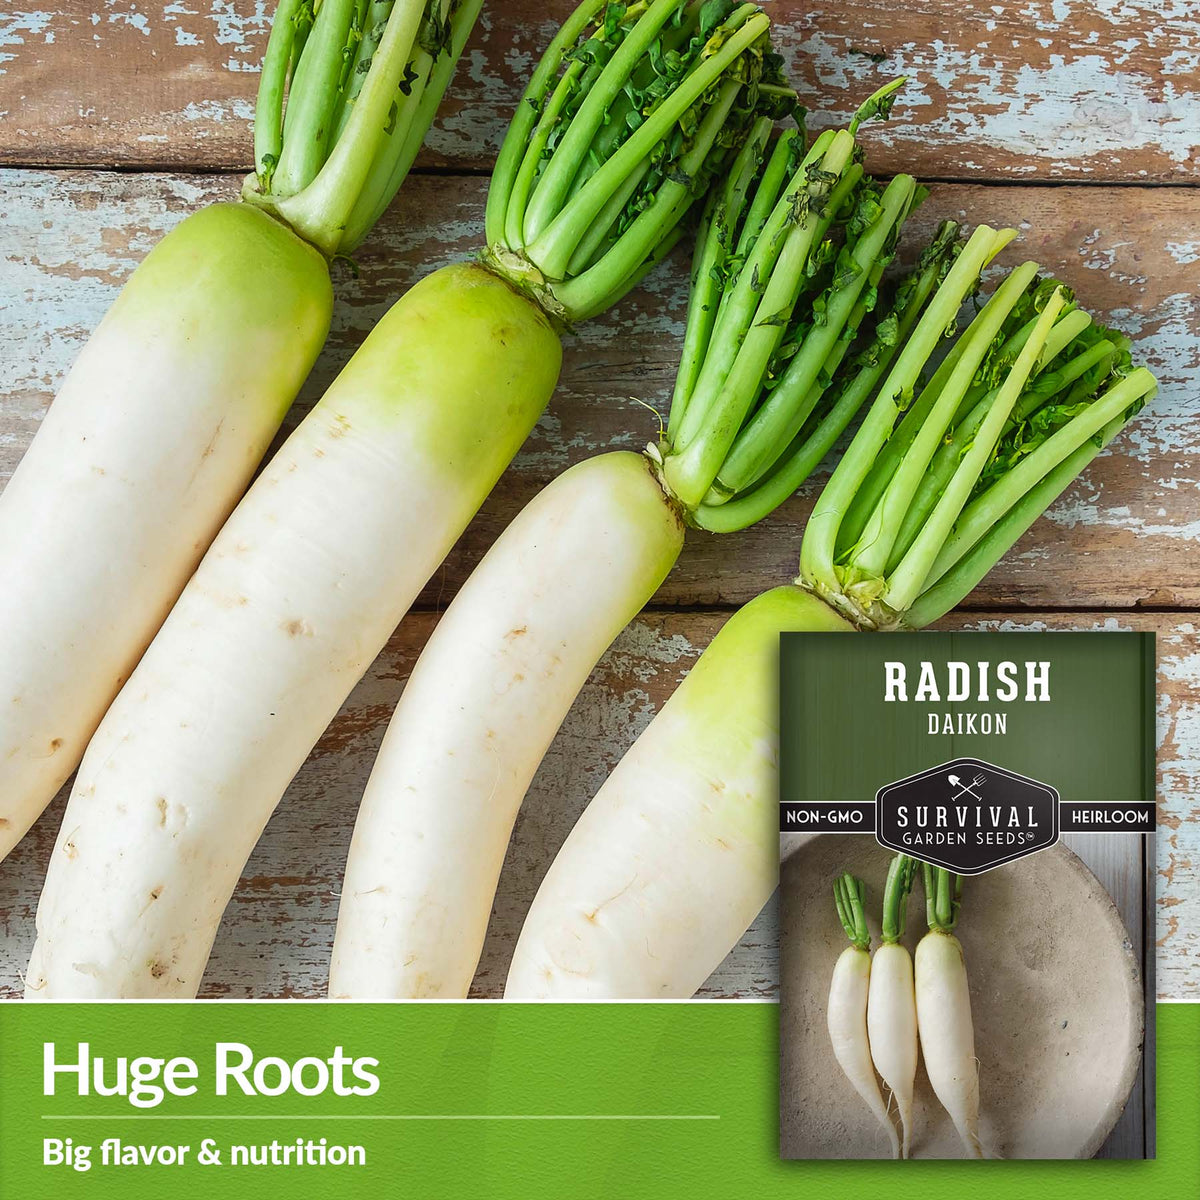 Daikon Radish has huge roots with big flavor and nutrition